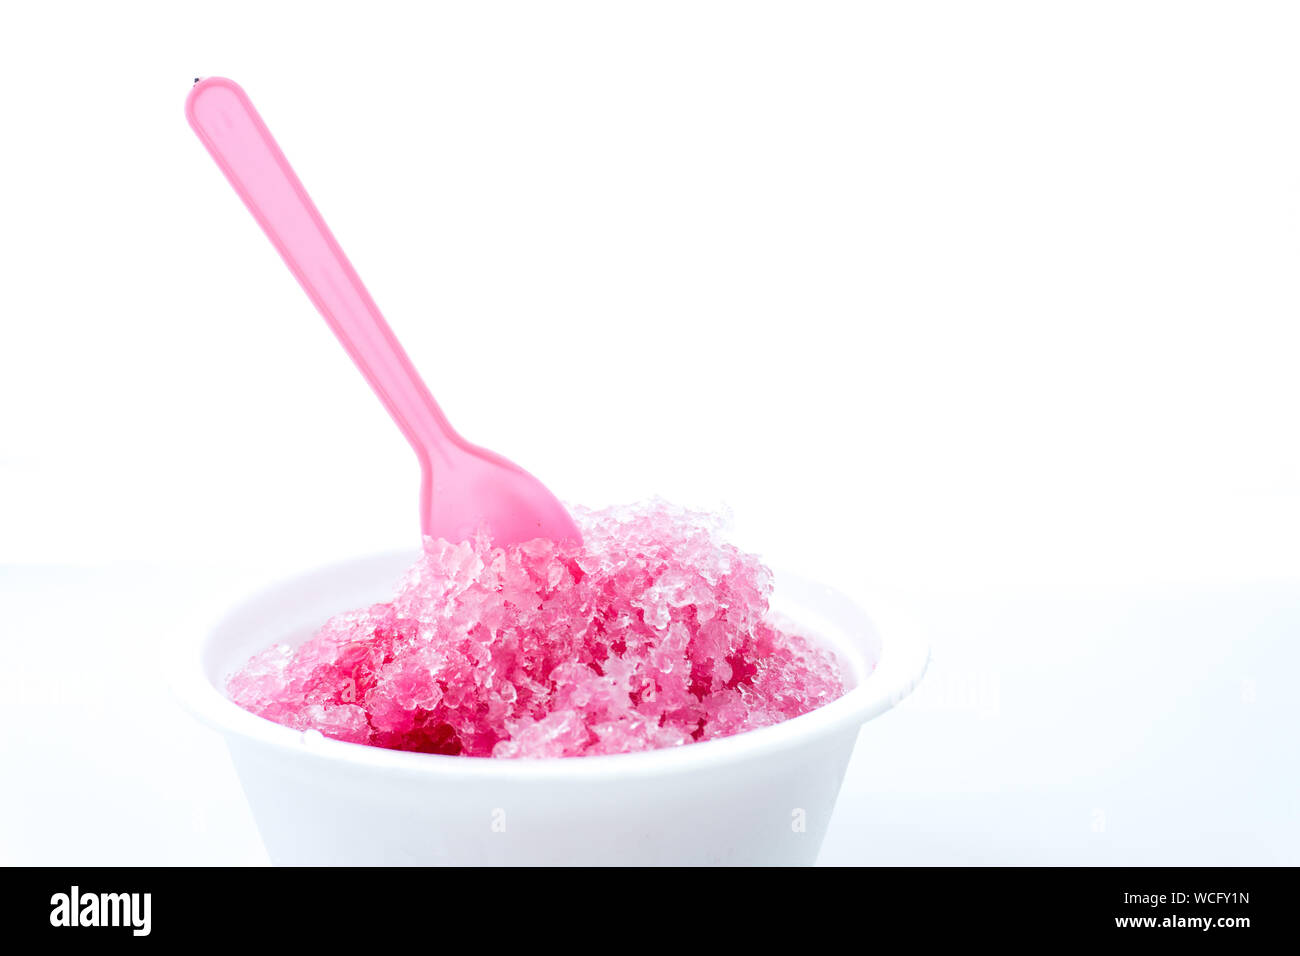 Close-up Of Flavored Ice Against White Background Stock Photo